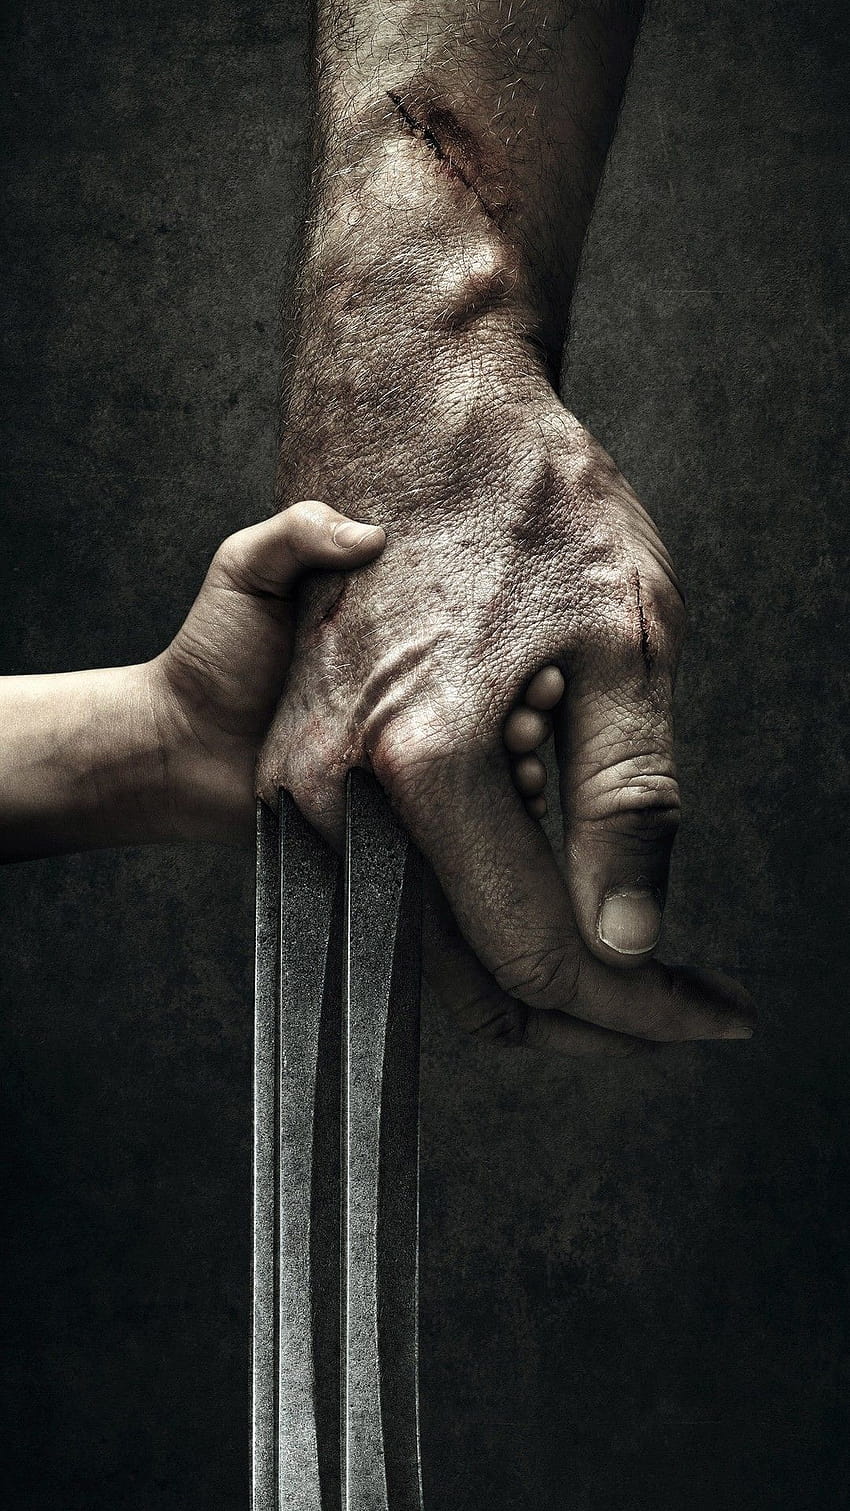 2017 Logan Movie Honor Smartphone, movie android mobile HD phone wallpaper